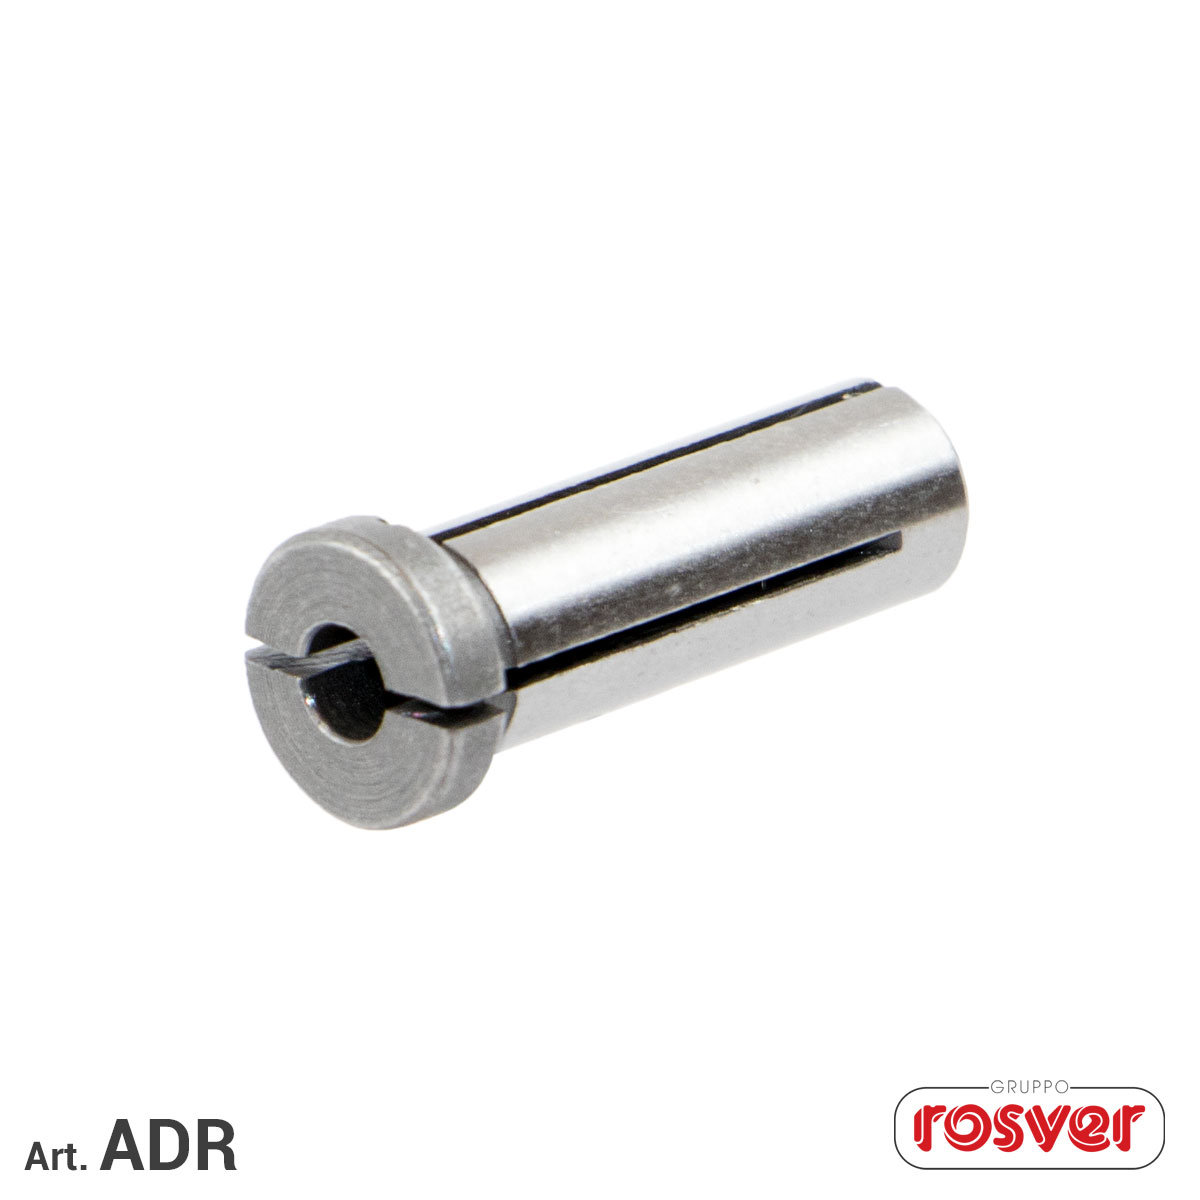 Adapter for Shank from 3mm to 6mm - Rosver Abrasives